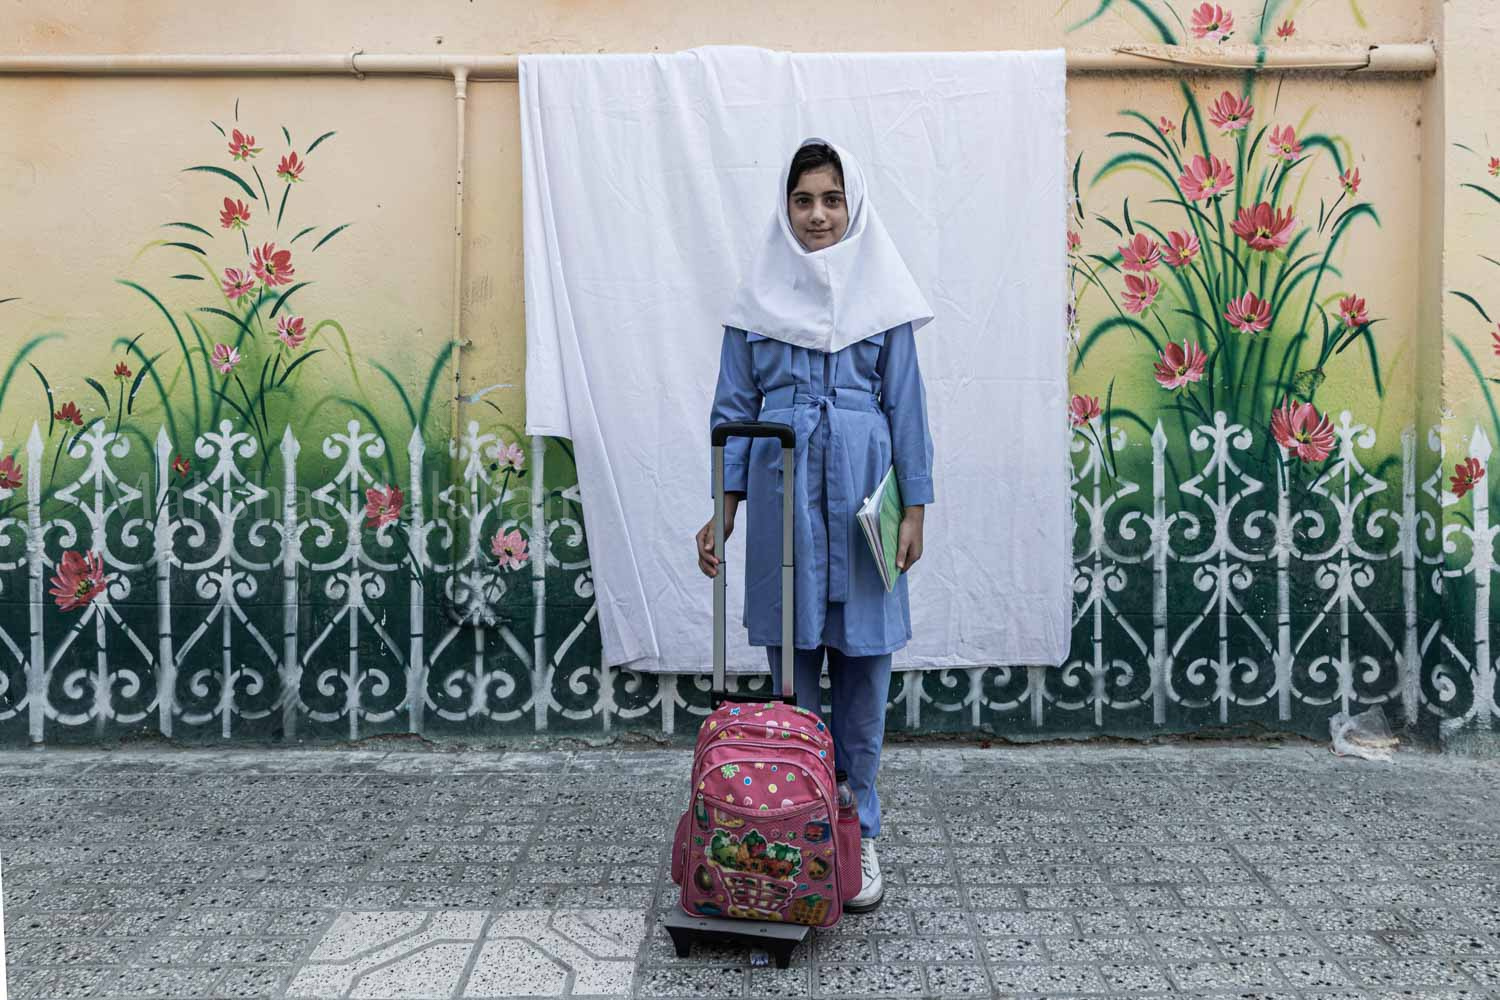 Asyeh Yasini 10-year-old moved 5 months ago from Herat, Afghanistan.